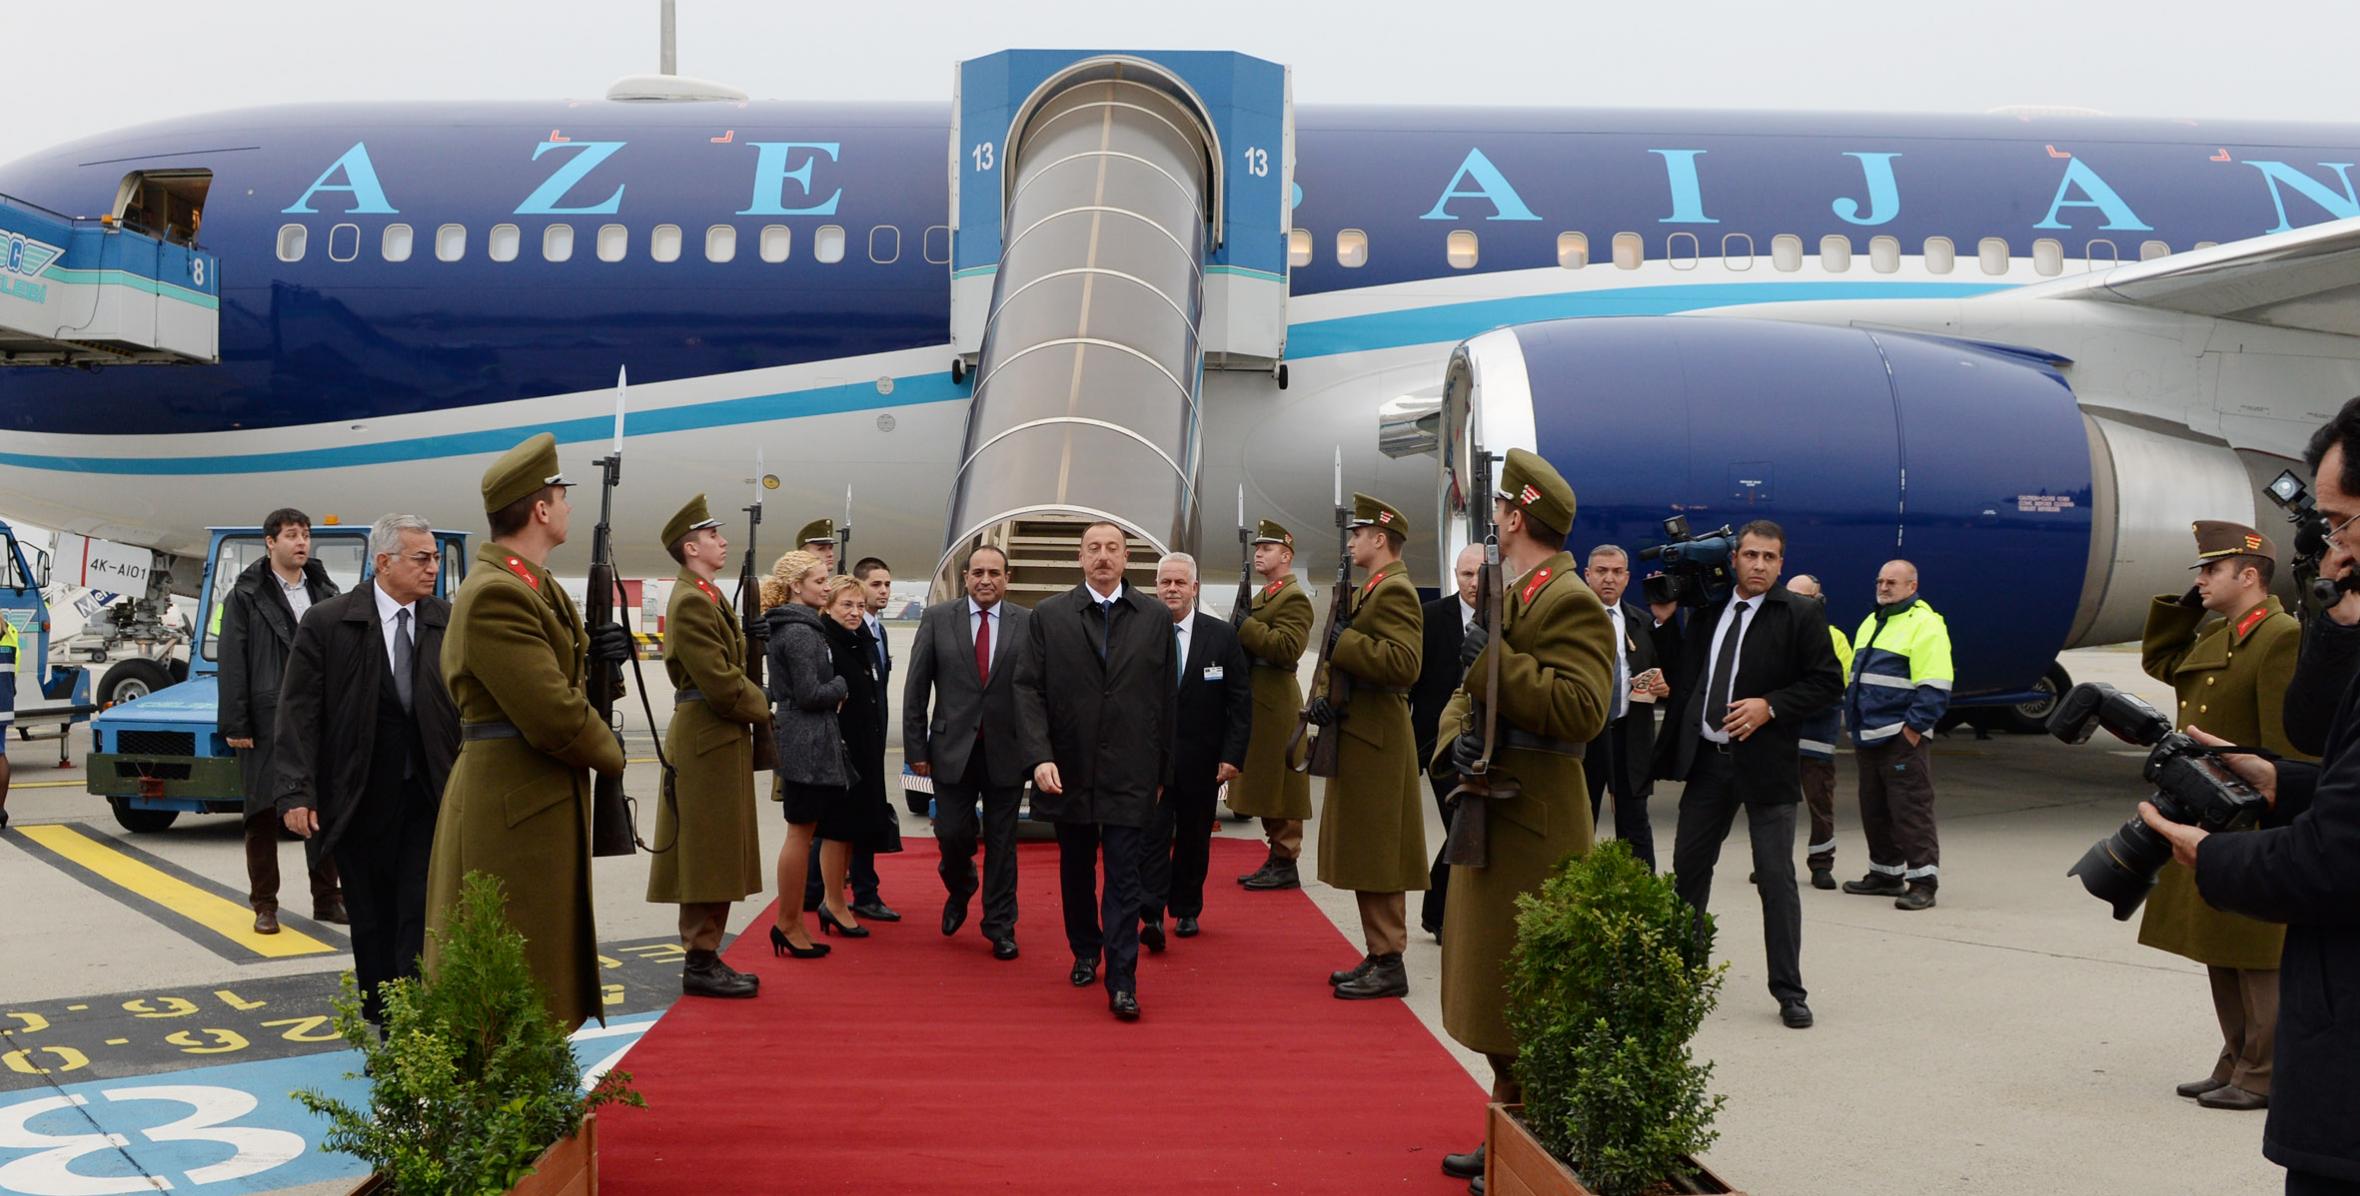 Ilham Aliyev arrived in Hungary on a working visit